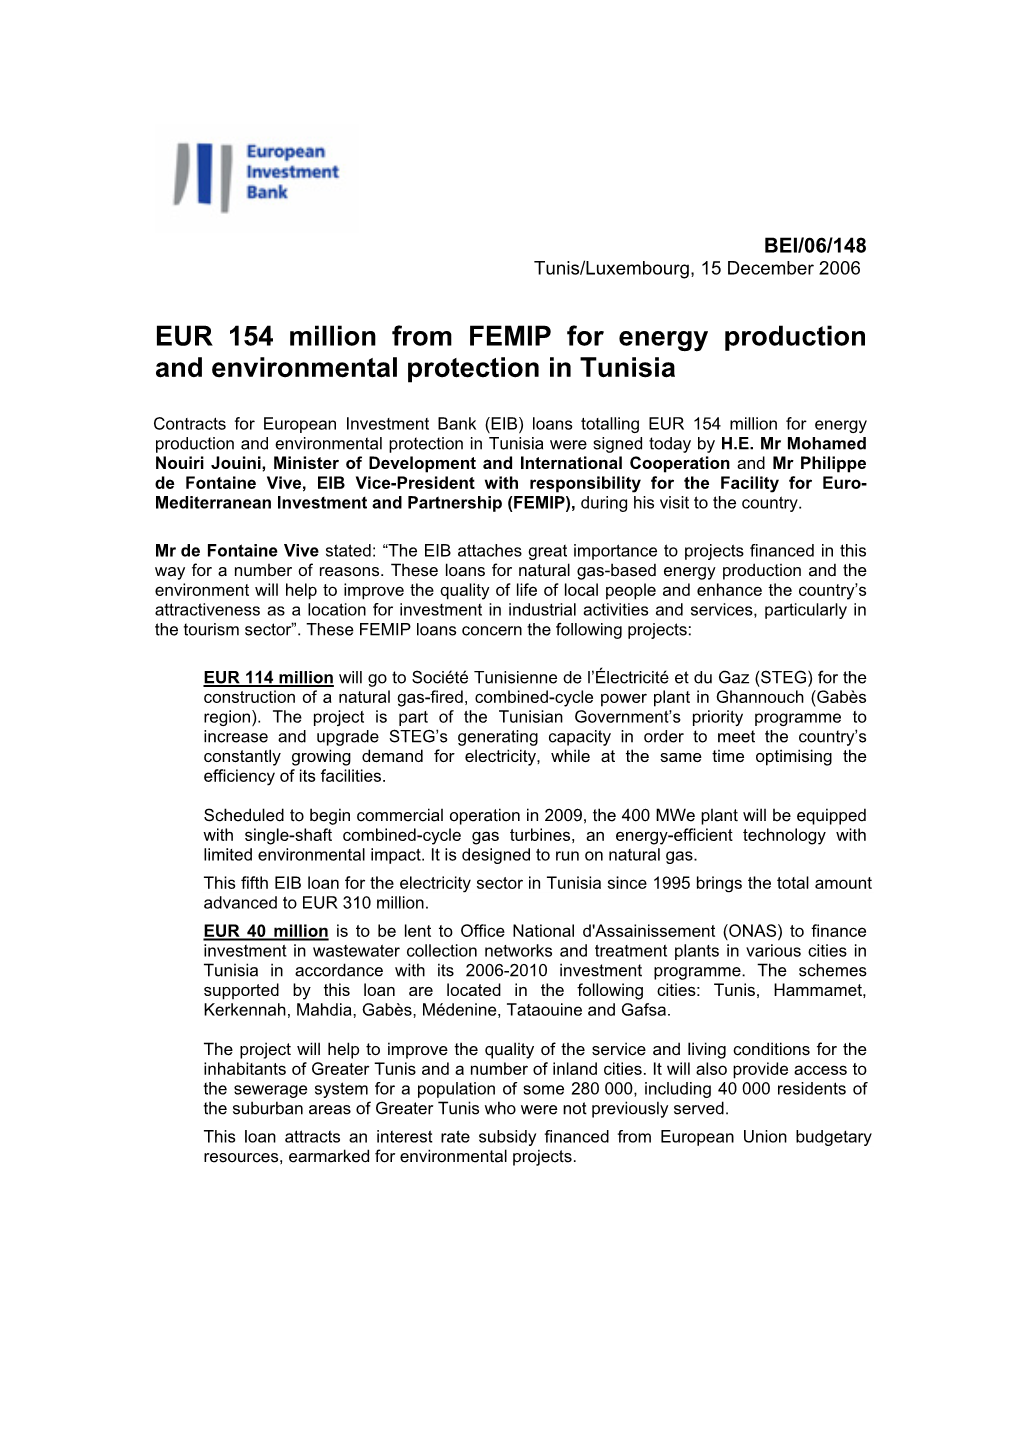 EUR 154 Million from FEMIP for Energy Production and Environmental Protection in Tunisia